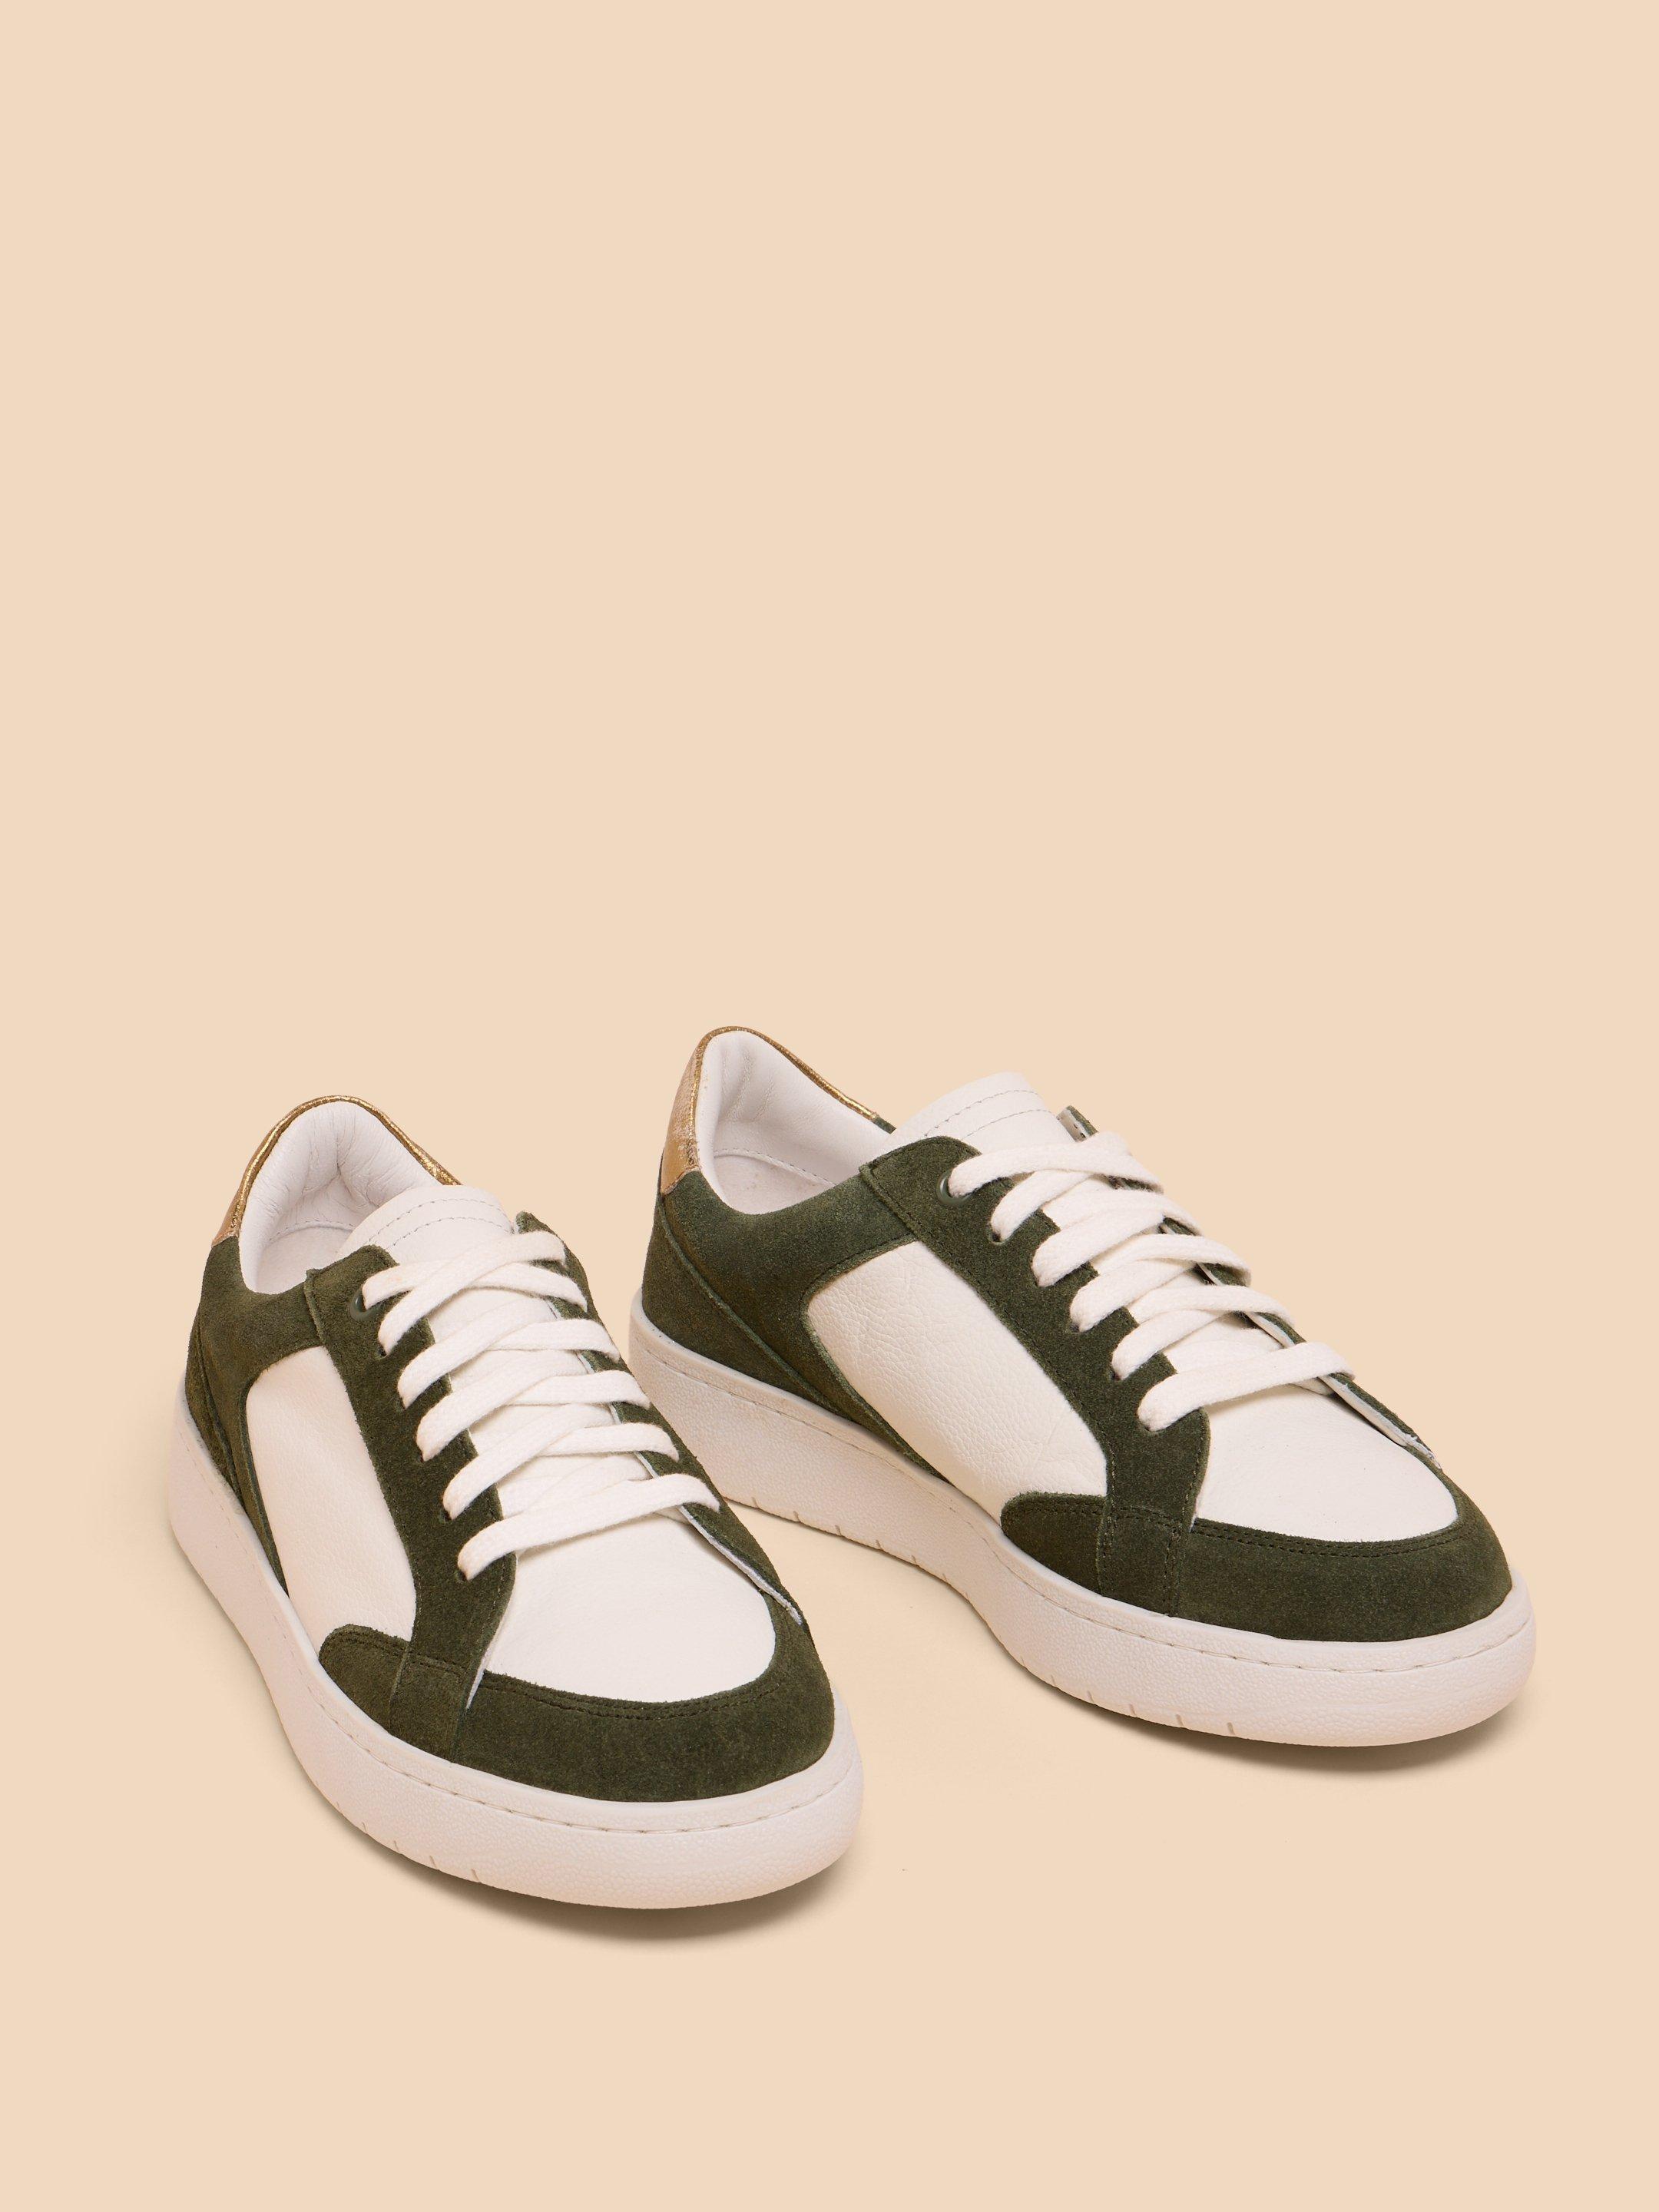 Dahlia Leather Trainer in GREEN MLT - FLAT FRONT